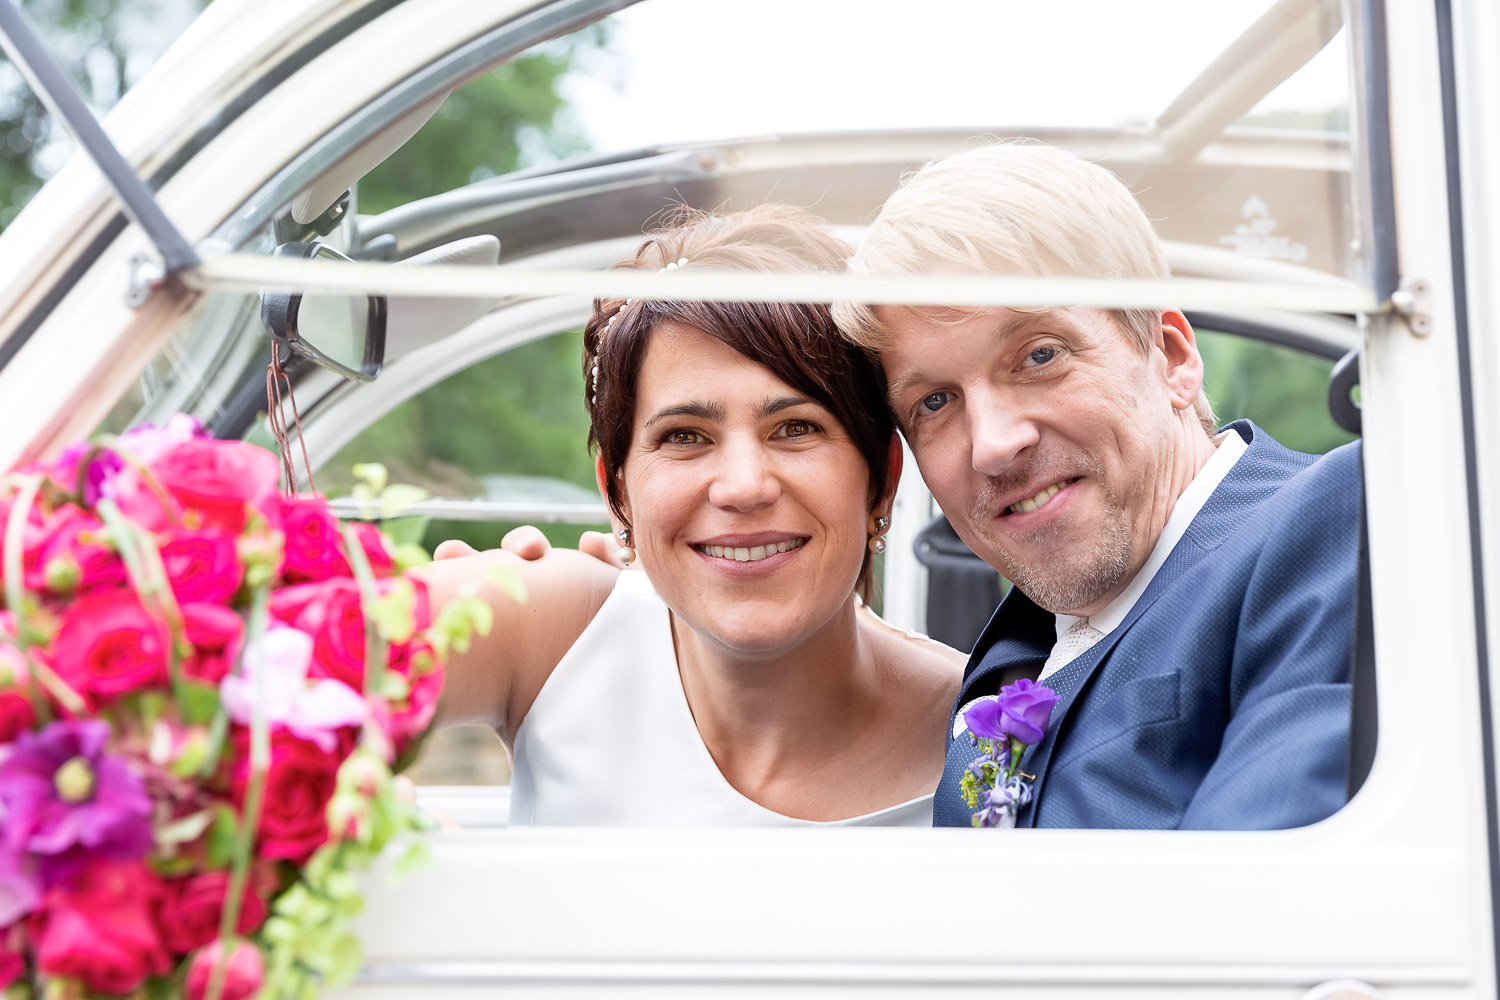 Wedding couple looking out of the car, Hochzeit, Wedding, Andrea Schenke Photography